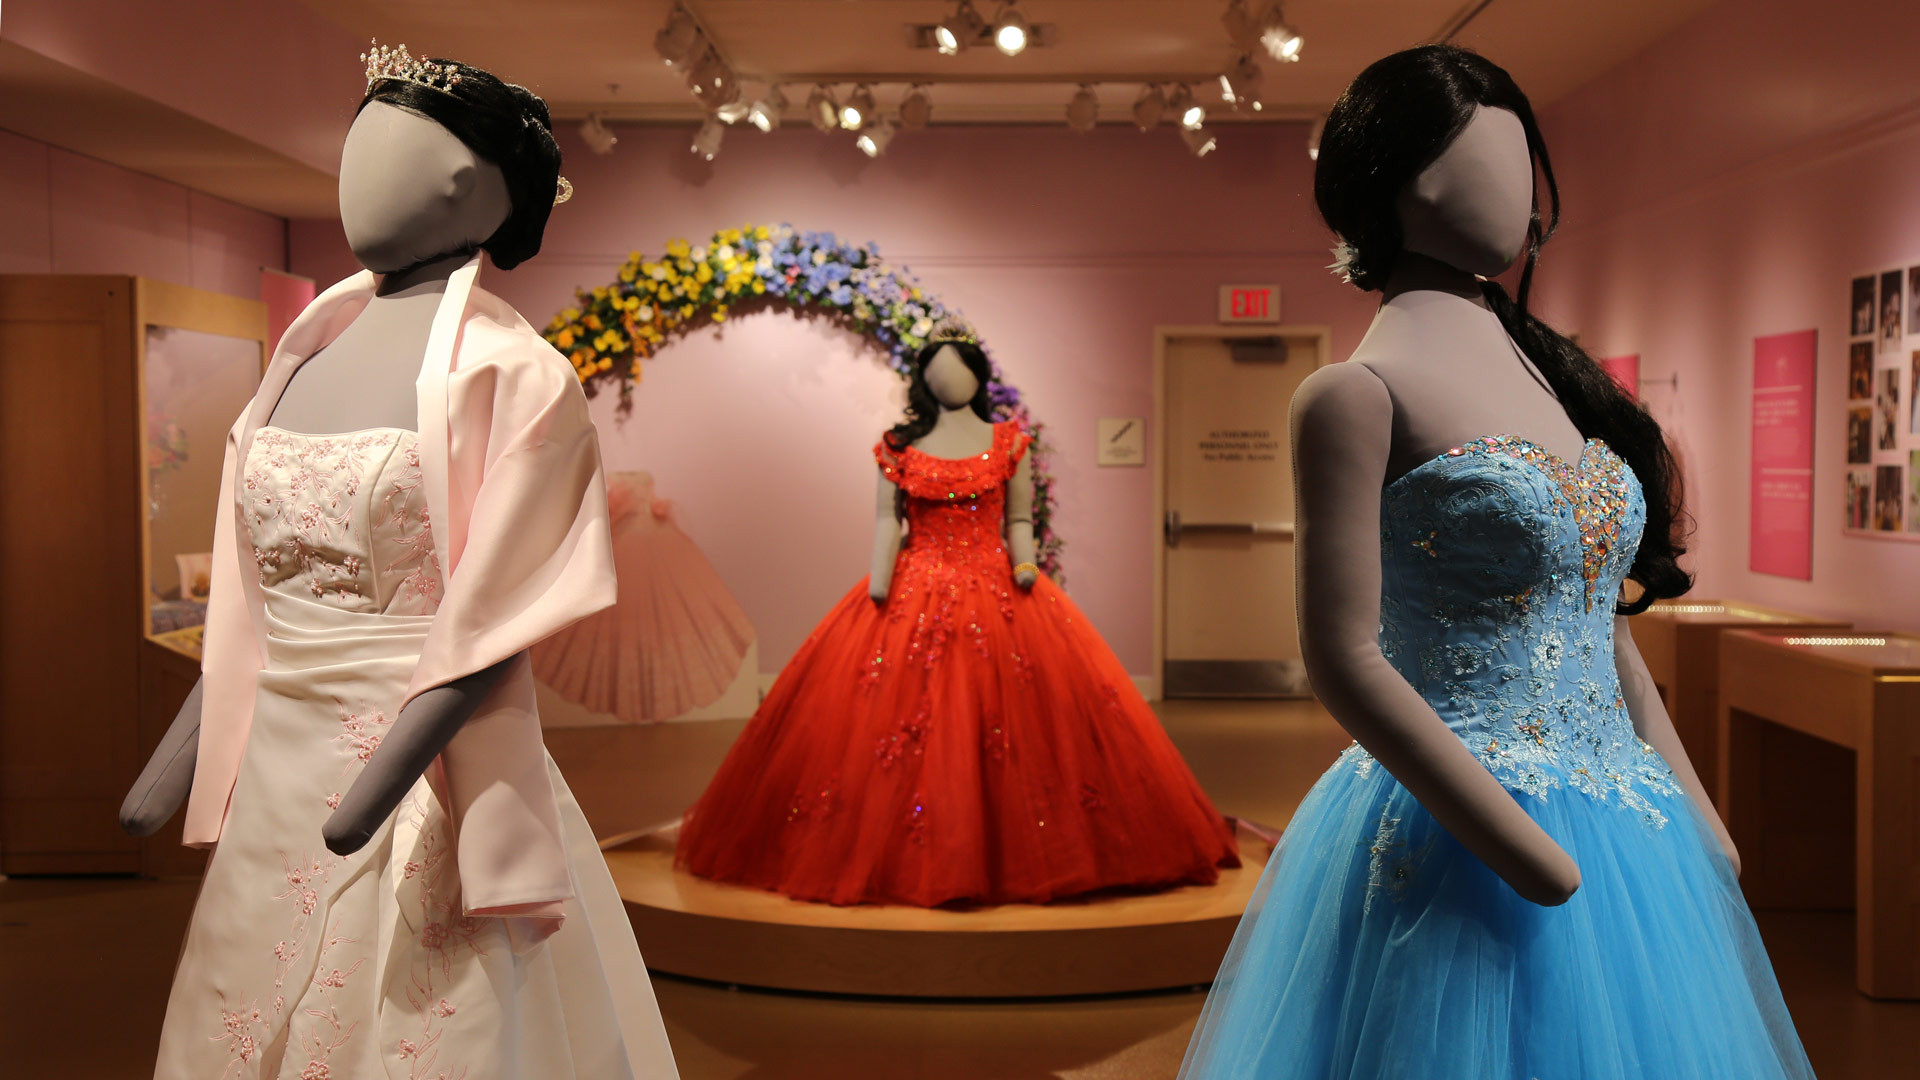 gallery shot of the three dresses